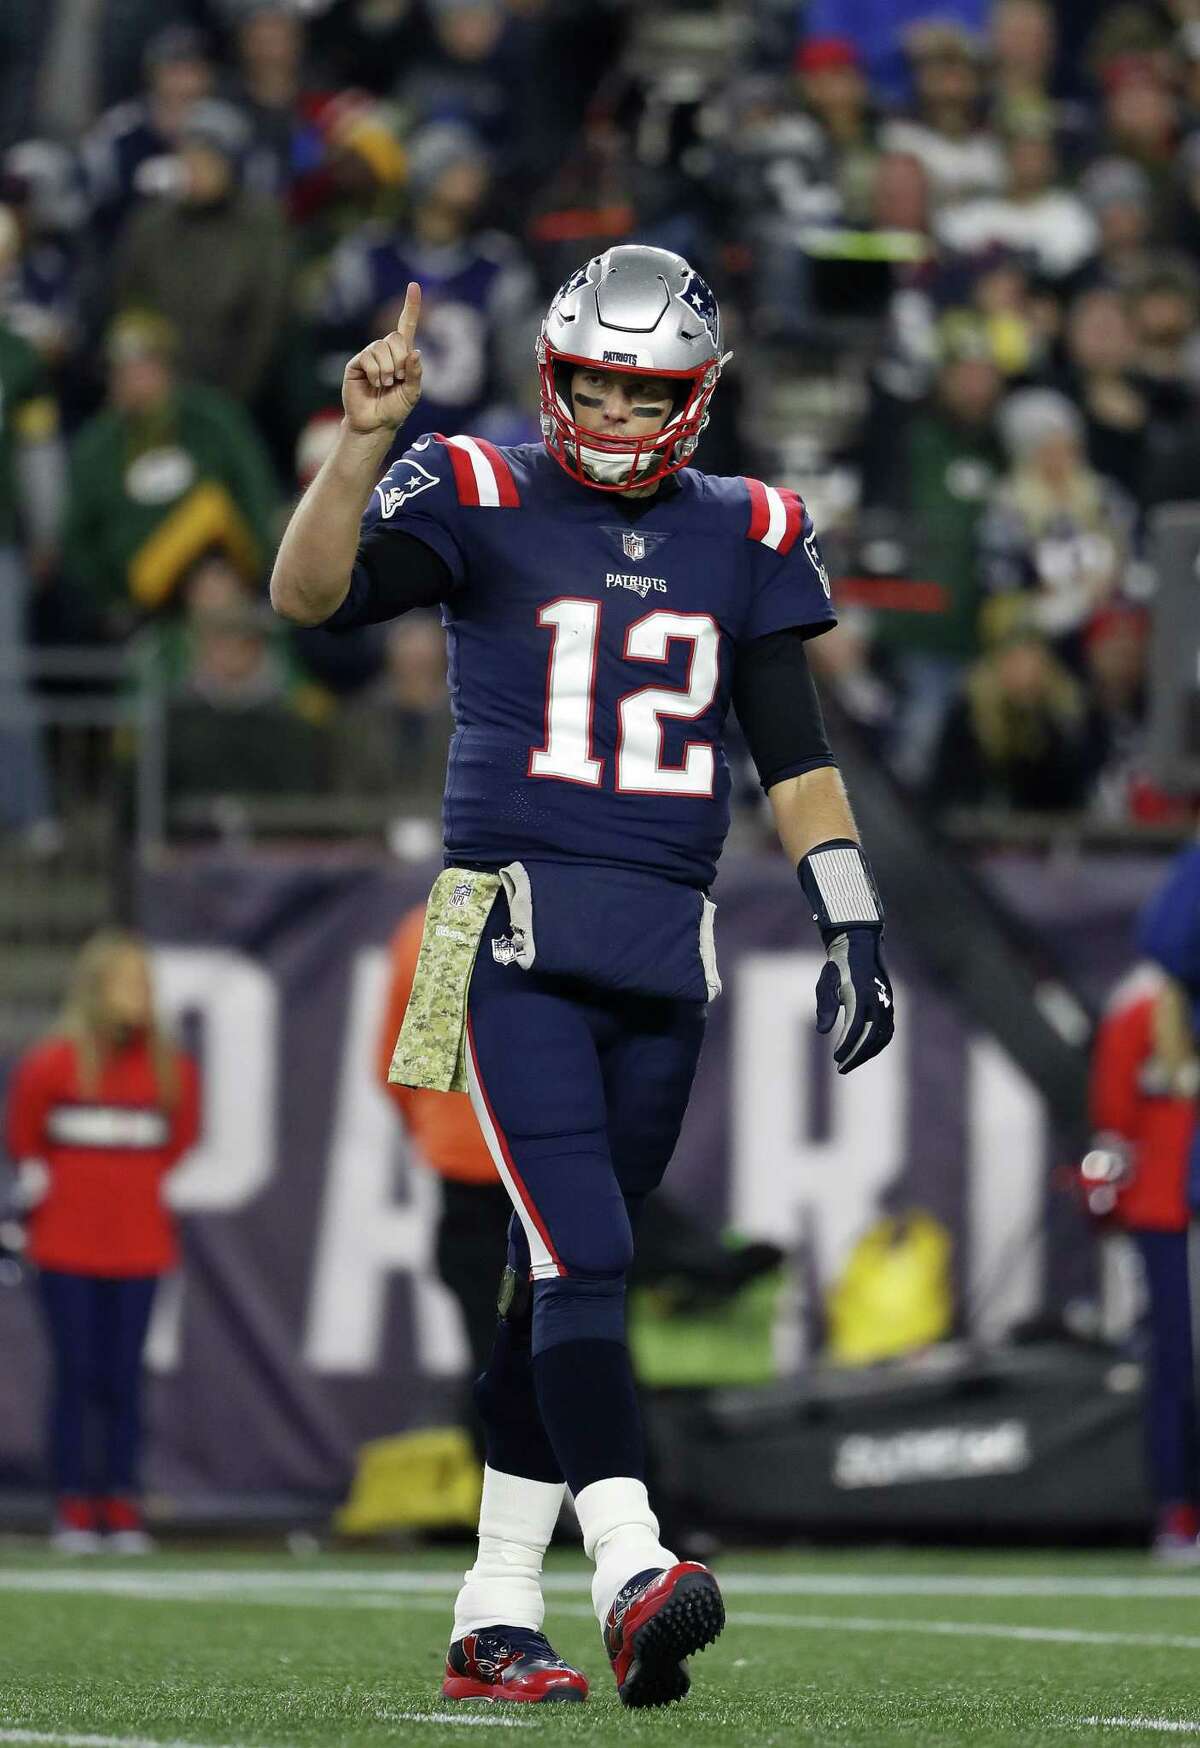 New England Patriots quarterback Tom Brady during a game against the Green Bay Packers at Gillette Stadium, Sunday, Nov. 4, 2018 in Foxborough, Mass. The game ranked as the most-watched Sunday night NFL game of the 2018 season, with an average of about 23.7 million TV viewers.